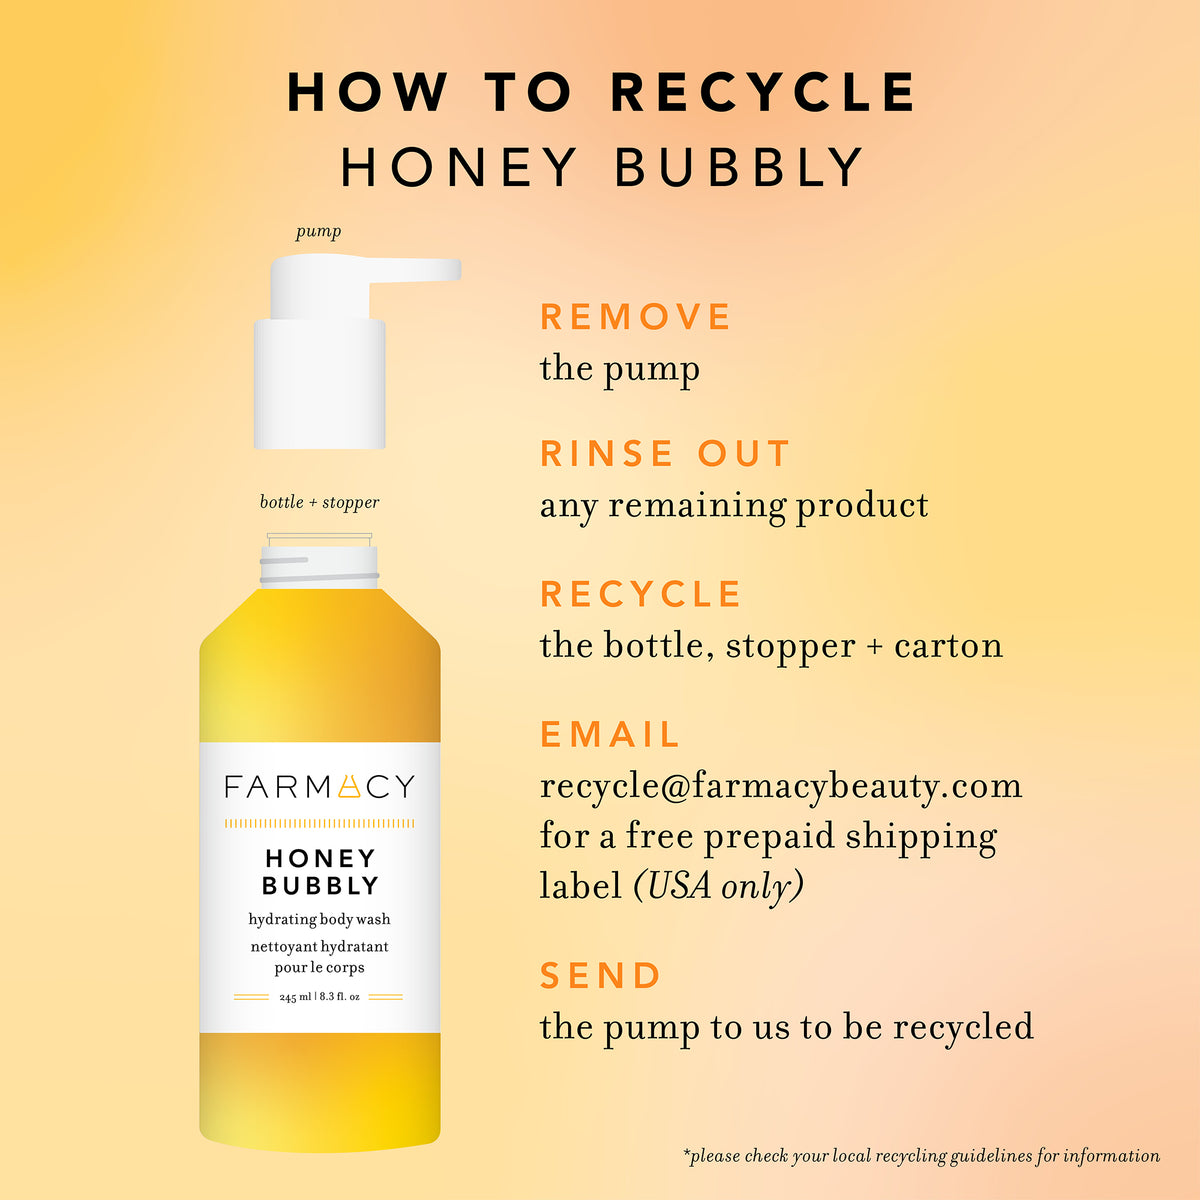 How to recycle Honey Bubbly